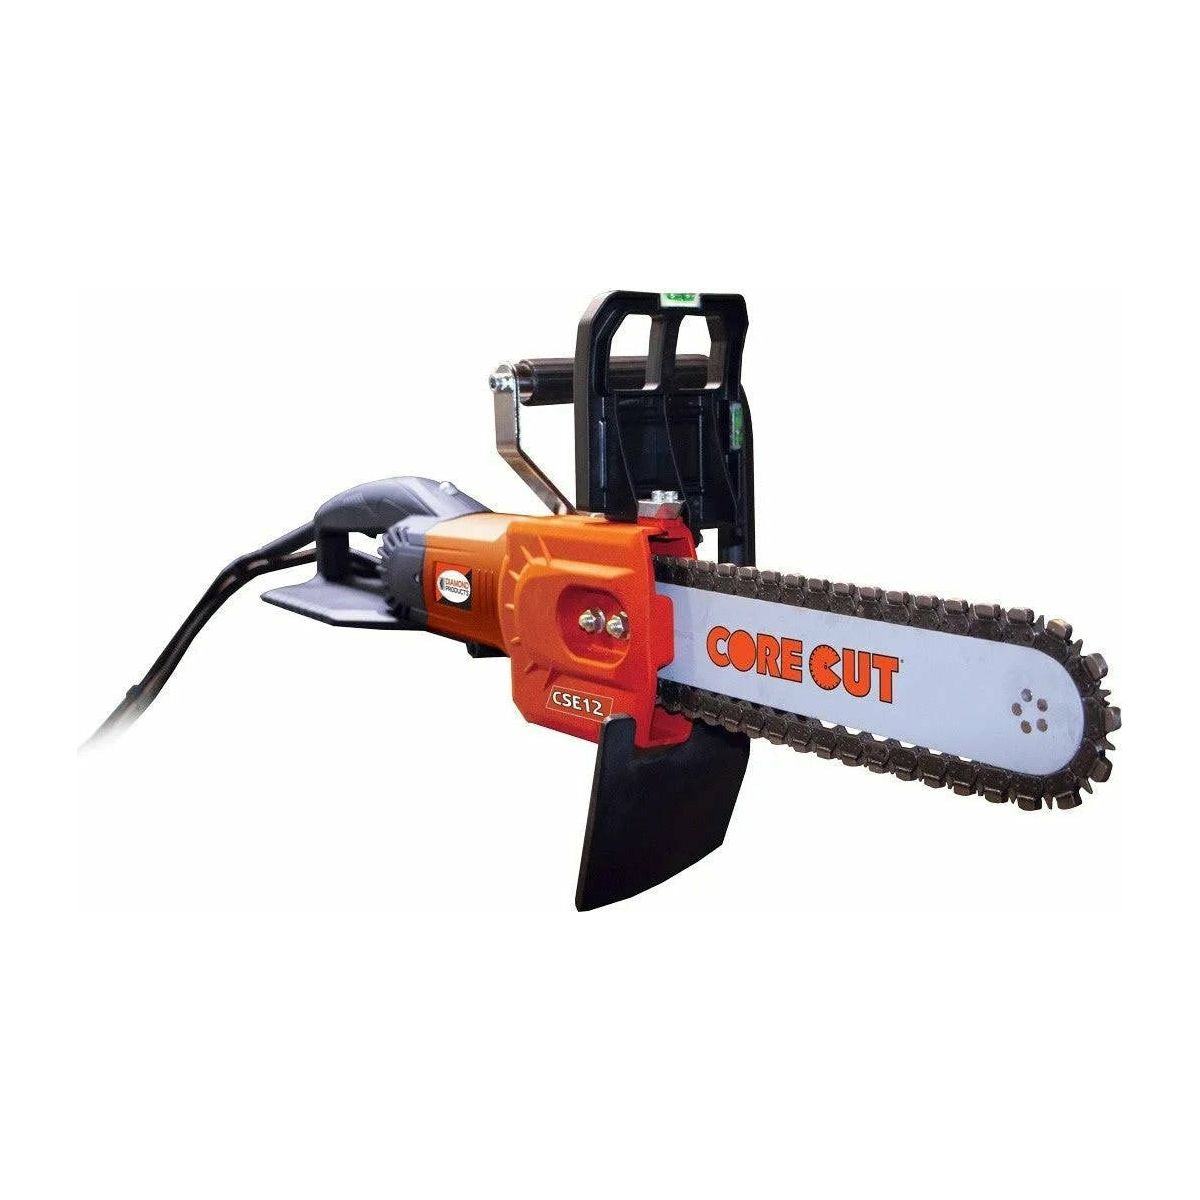 CSE12 ELECTRIC CHAINSAW 12" BAR AND CHAIN INCLUDED